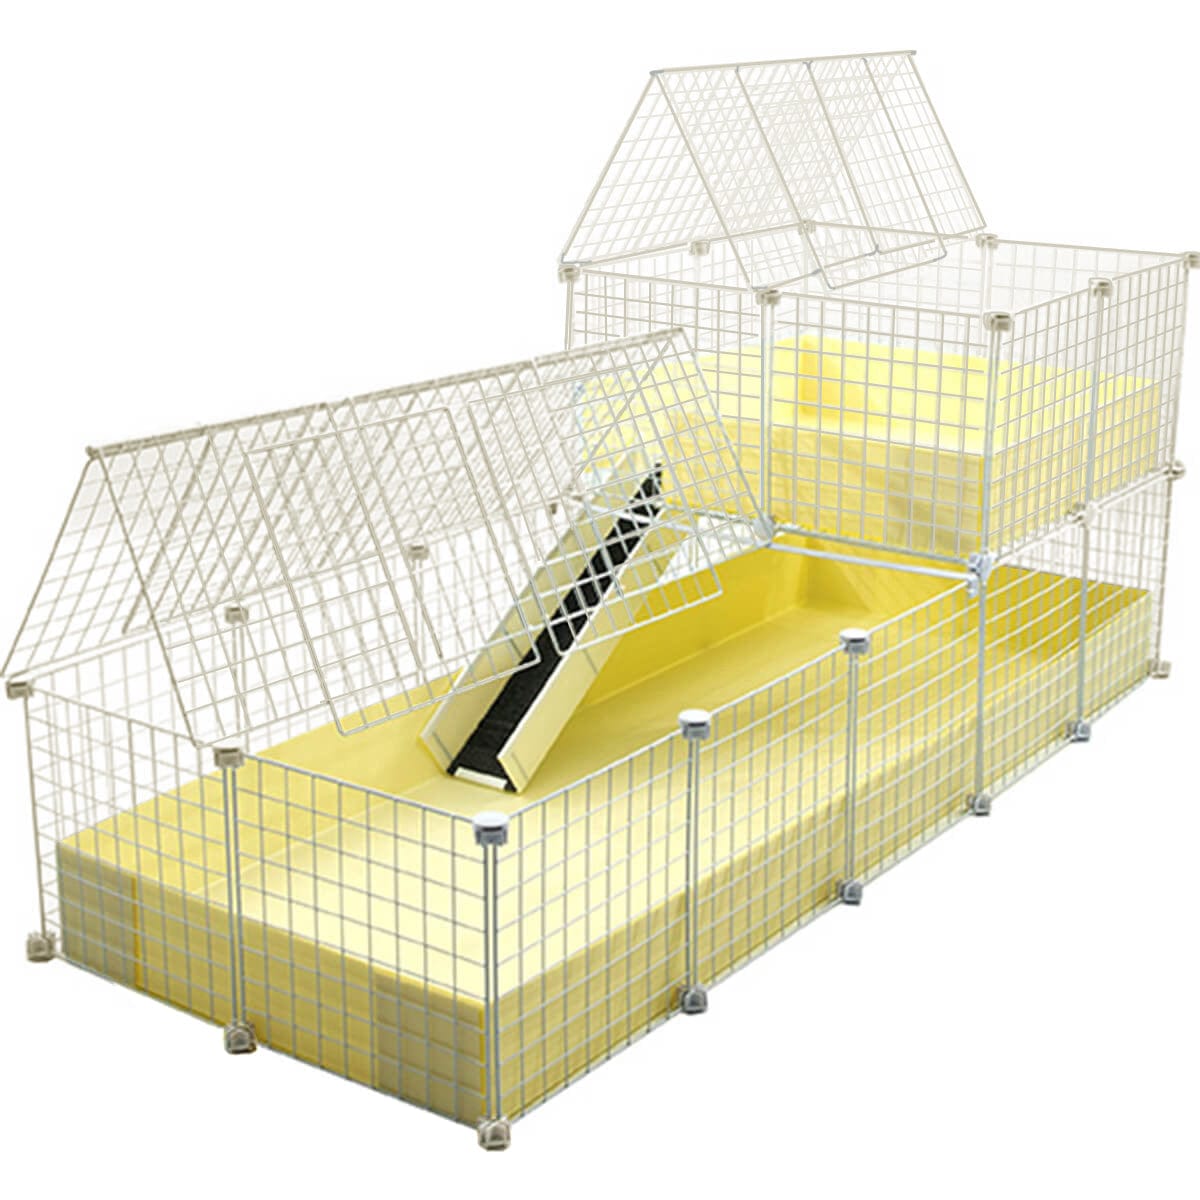 Covered XL cream C&C guinea pig cage with wide loft and ramp using white grids and connectors